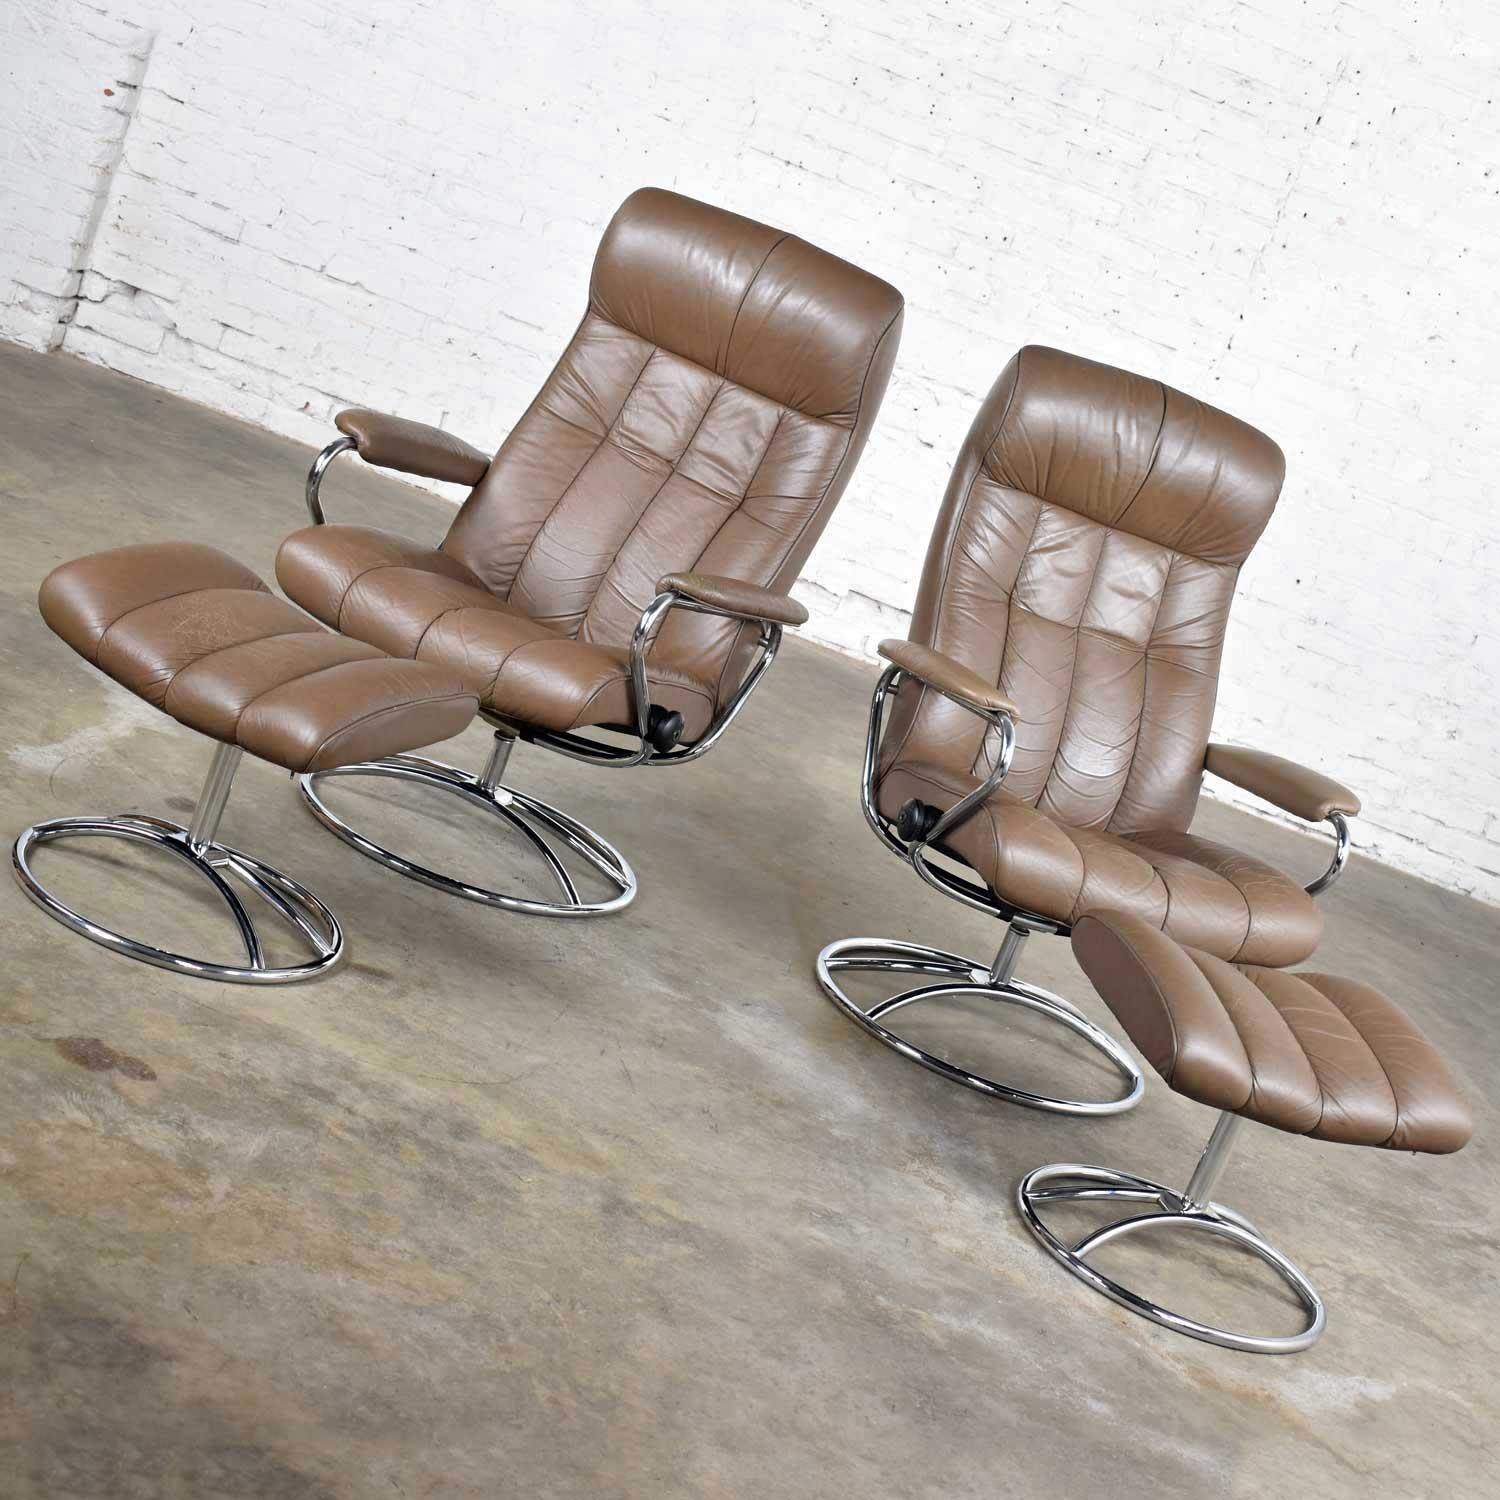 Wonderful pair of vintage Ekornes Stressless Scandinavian lounge chairs and ottomans. Comprised of taupe leather and chrome bases. Very good vintage condition. The arm rests on one chair have been reupholstered but may have a slight color